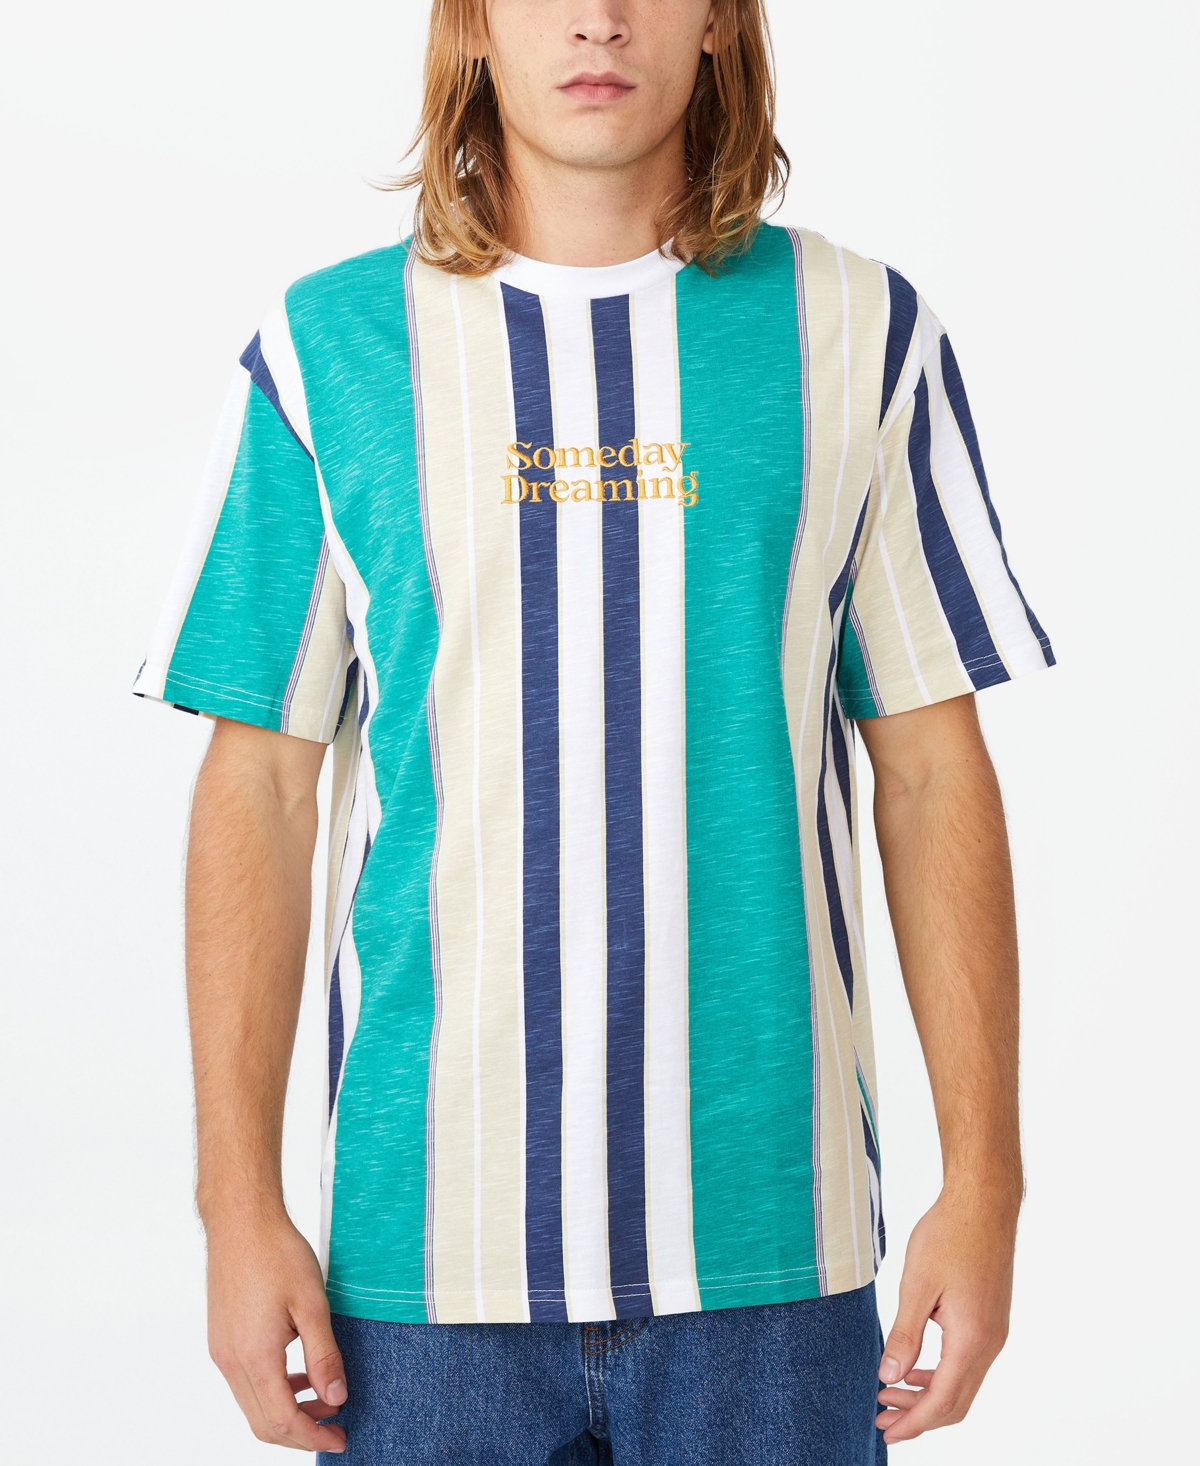 Cotton On Men's Downtown T-shirt In Someday Dreaming Emerald Stripe